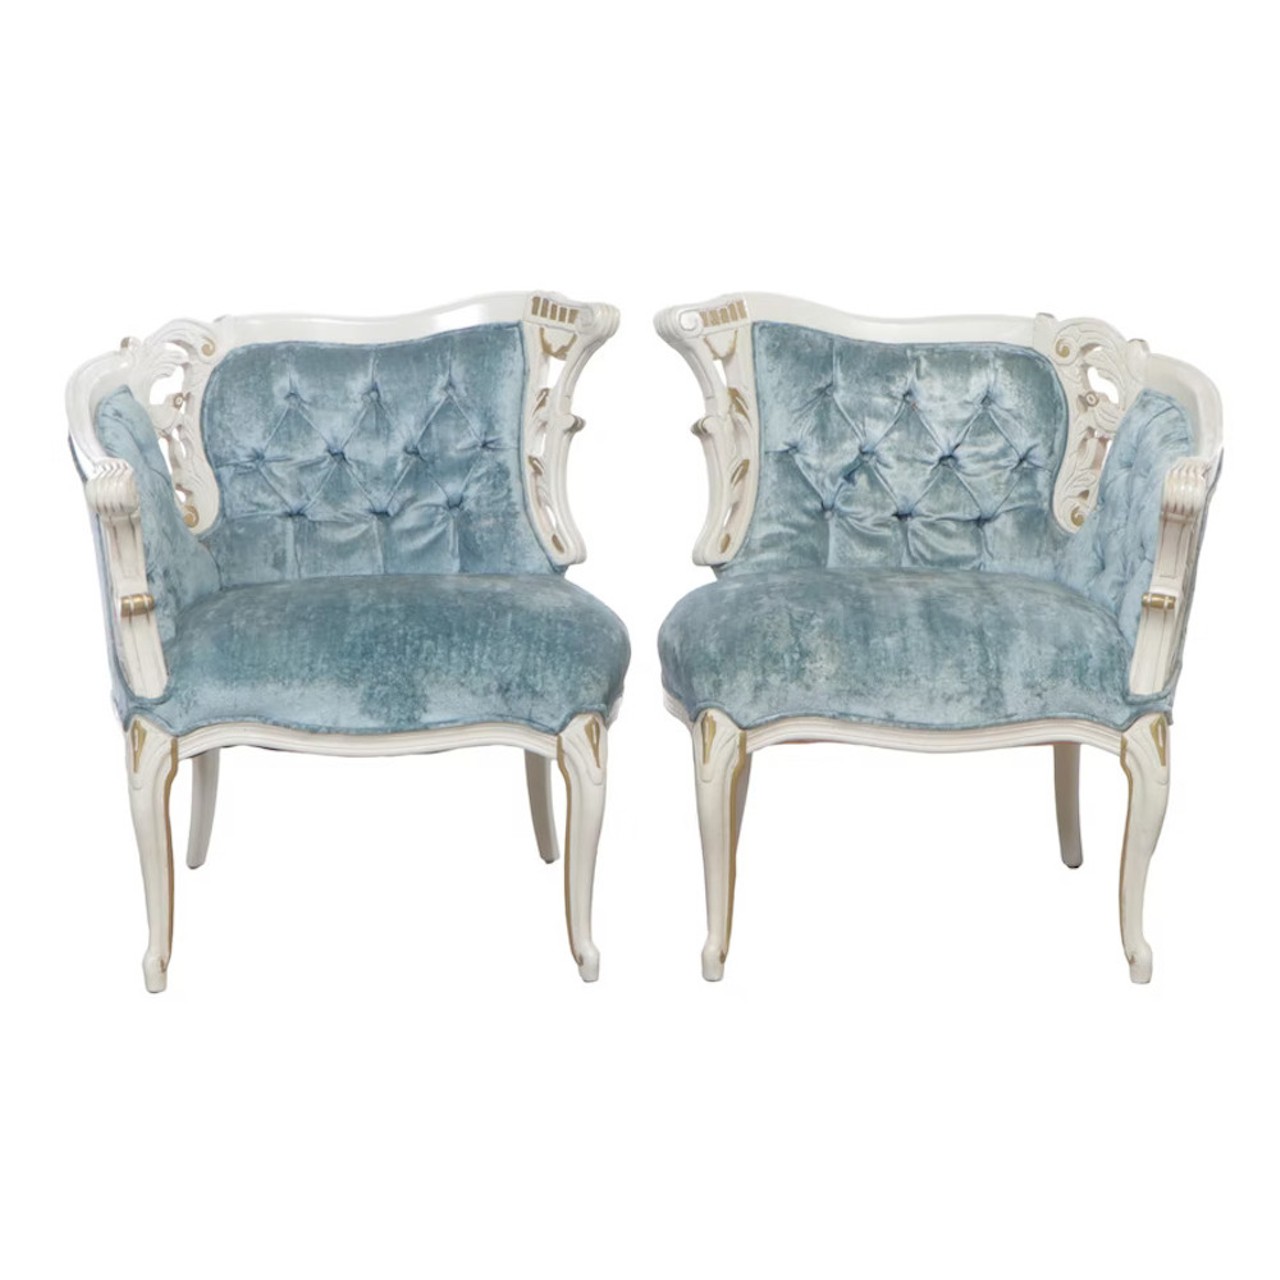 Two Louis XV Style Painted, Parcel-Gilt, and Buttoned-Down Corner Armchairs
For the bold and sexy on your list, these one-of-a-kind accent chairs are showstoppers. Show up to the holiday party with a bow on these chairs and an arsenal of polaroids. You’ll want to be ready to capture vivid candids of your friends sipping their eggnog on the icy winter-blue velvet.